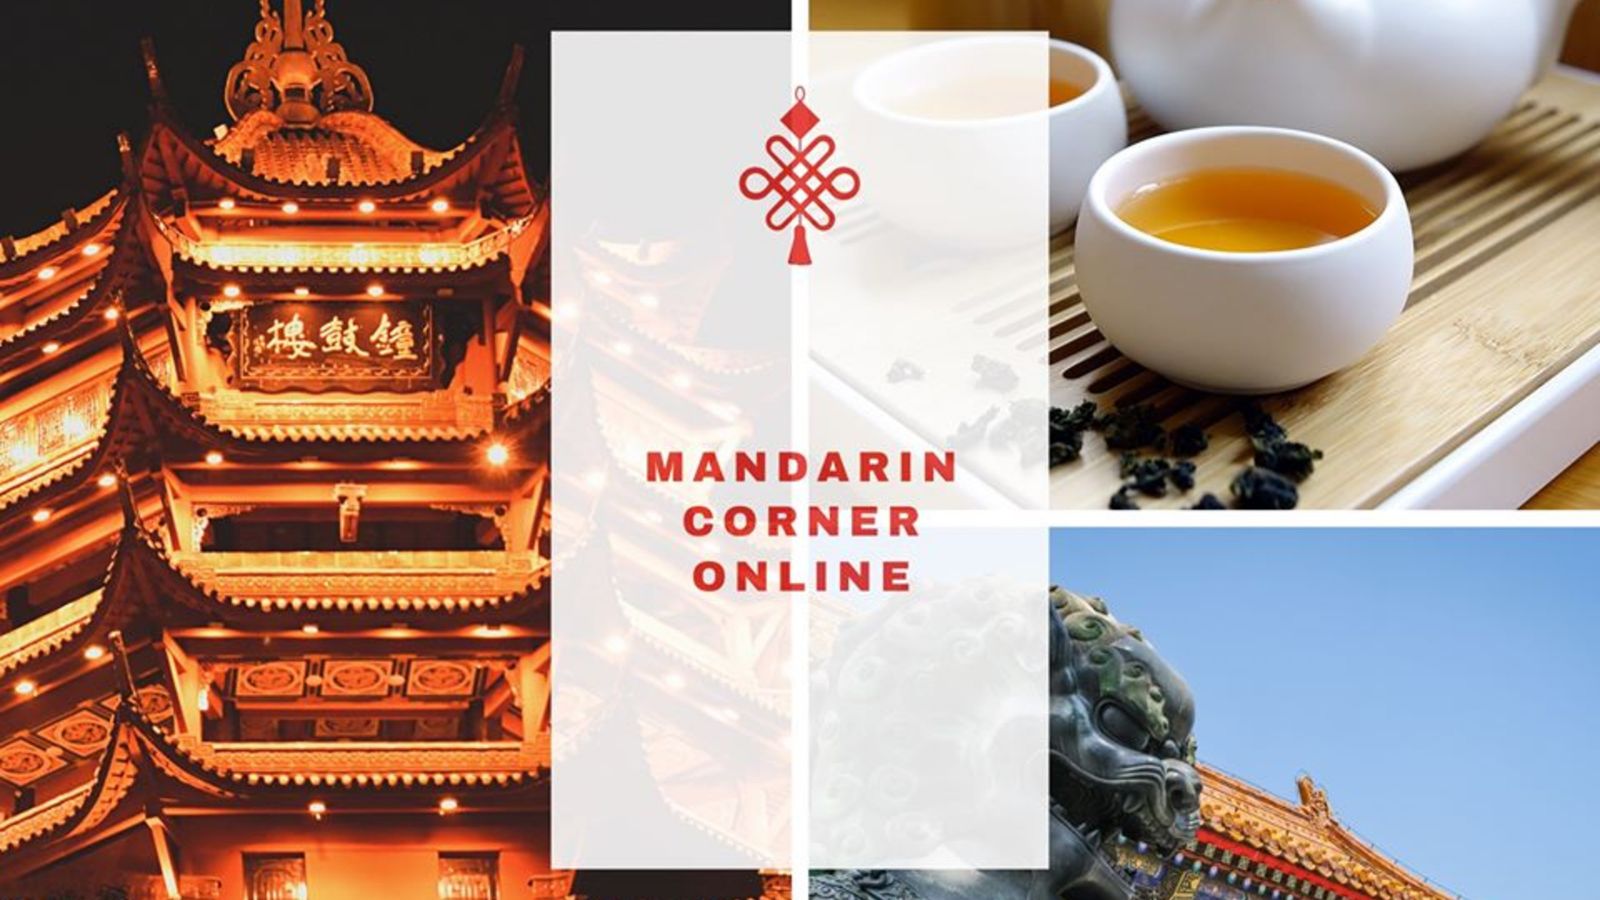 A Chinese pagoda, cups of tea, and a stone lion decorate a banner advertising Mandarin Corner Online.